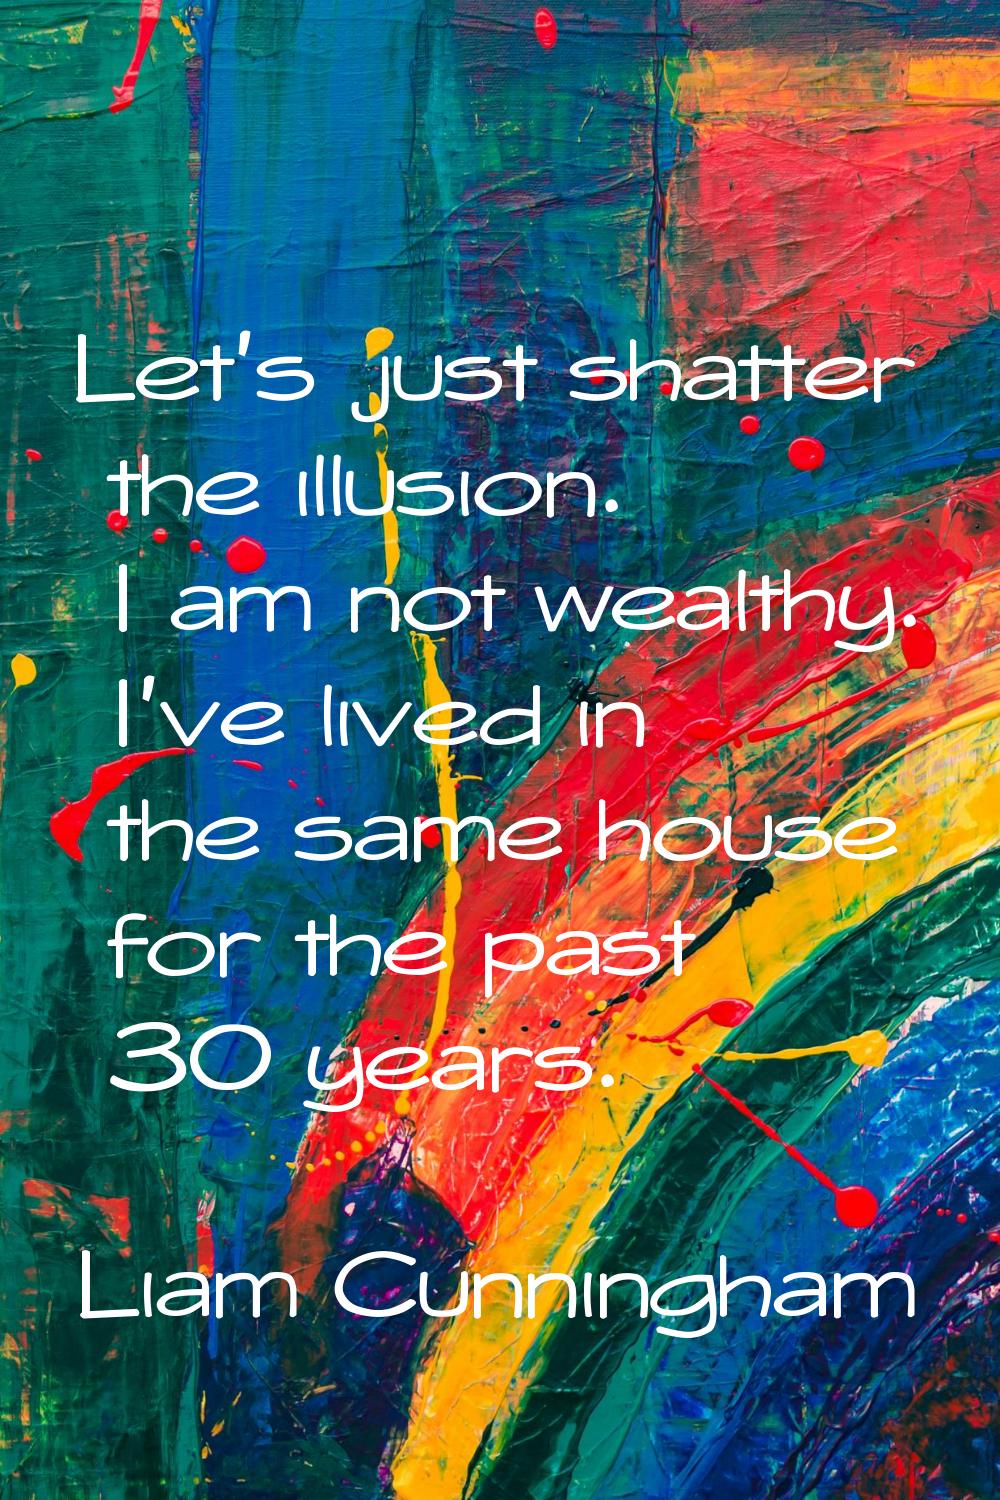 Let's just shatter the illusion. I am not wealthy. I've lived in the same house for the past 30 yea